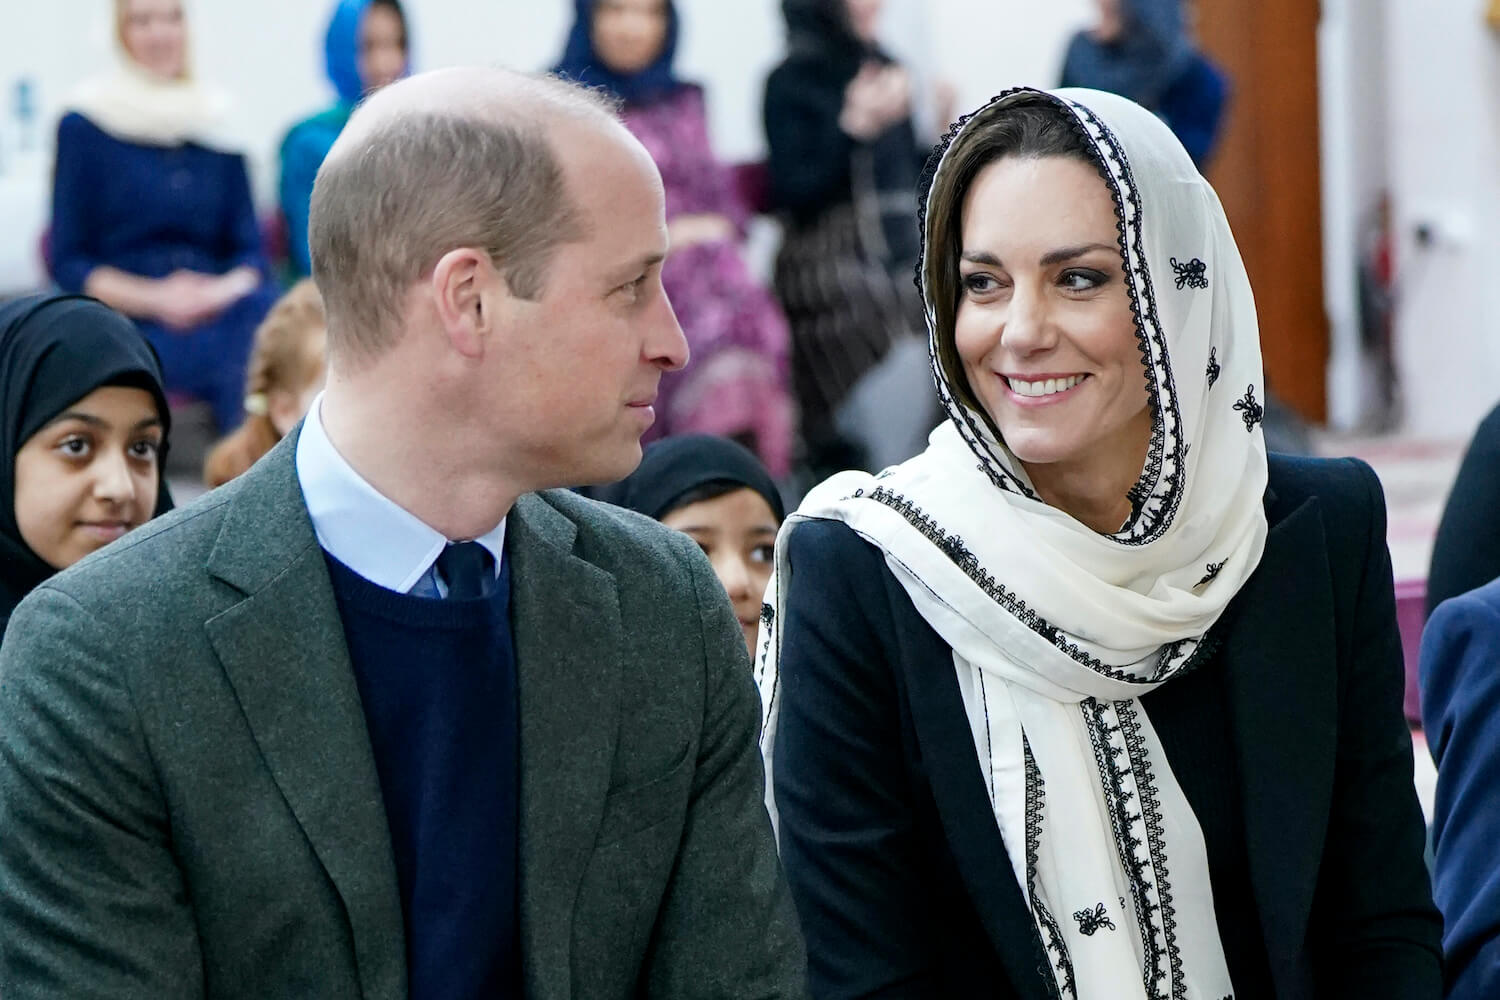 Prince William and Kate Middleton show intense body language with William making eye contact with Kate, who smiles while wearing a head scarf